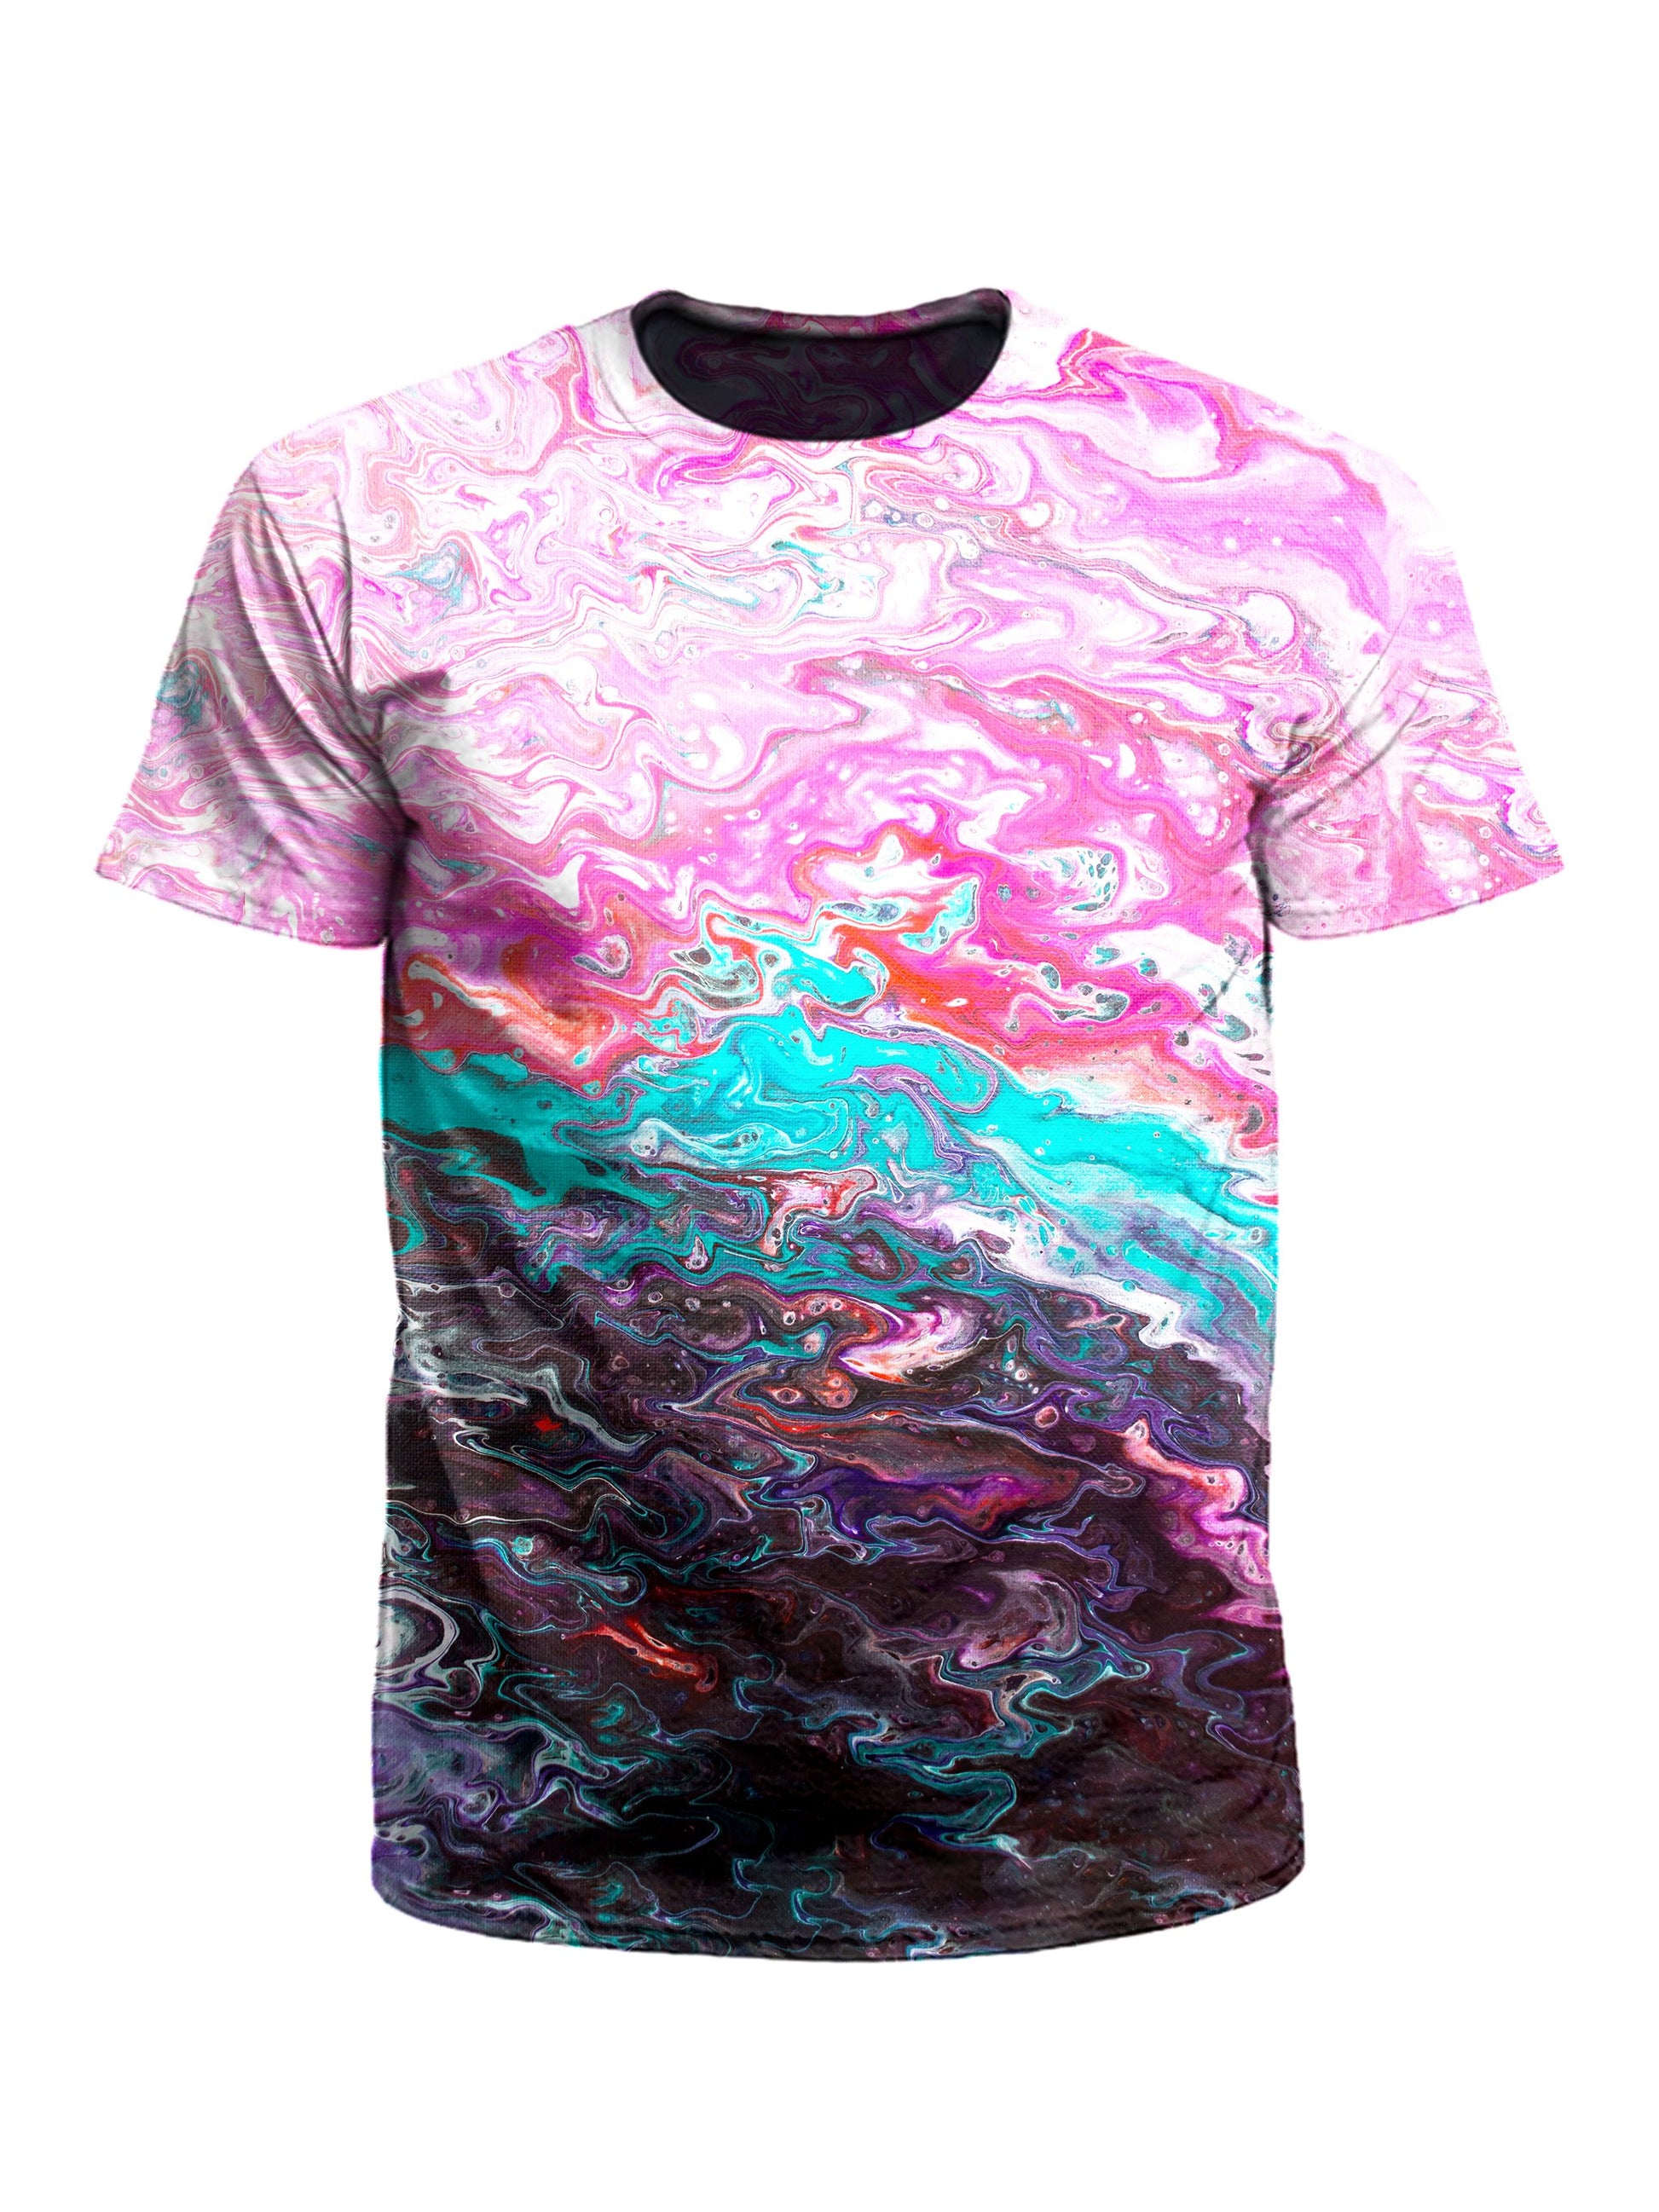 Men's pink, teal & black marble painting unisex t-shirt front view.